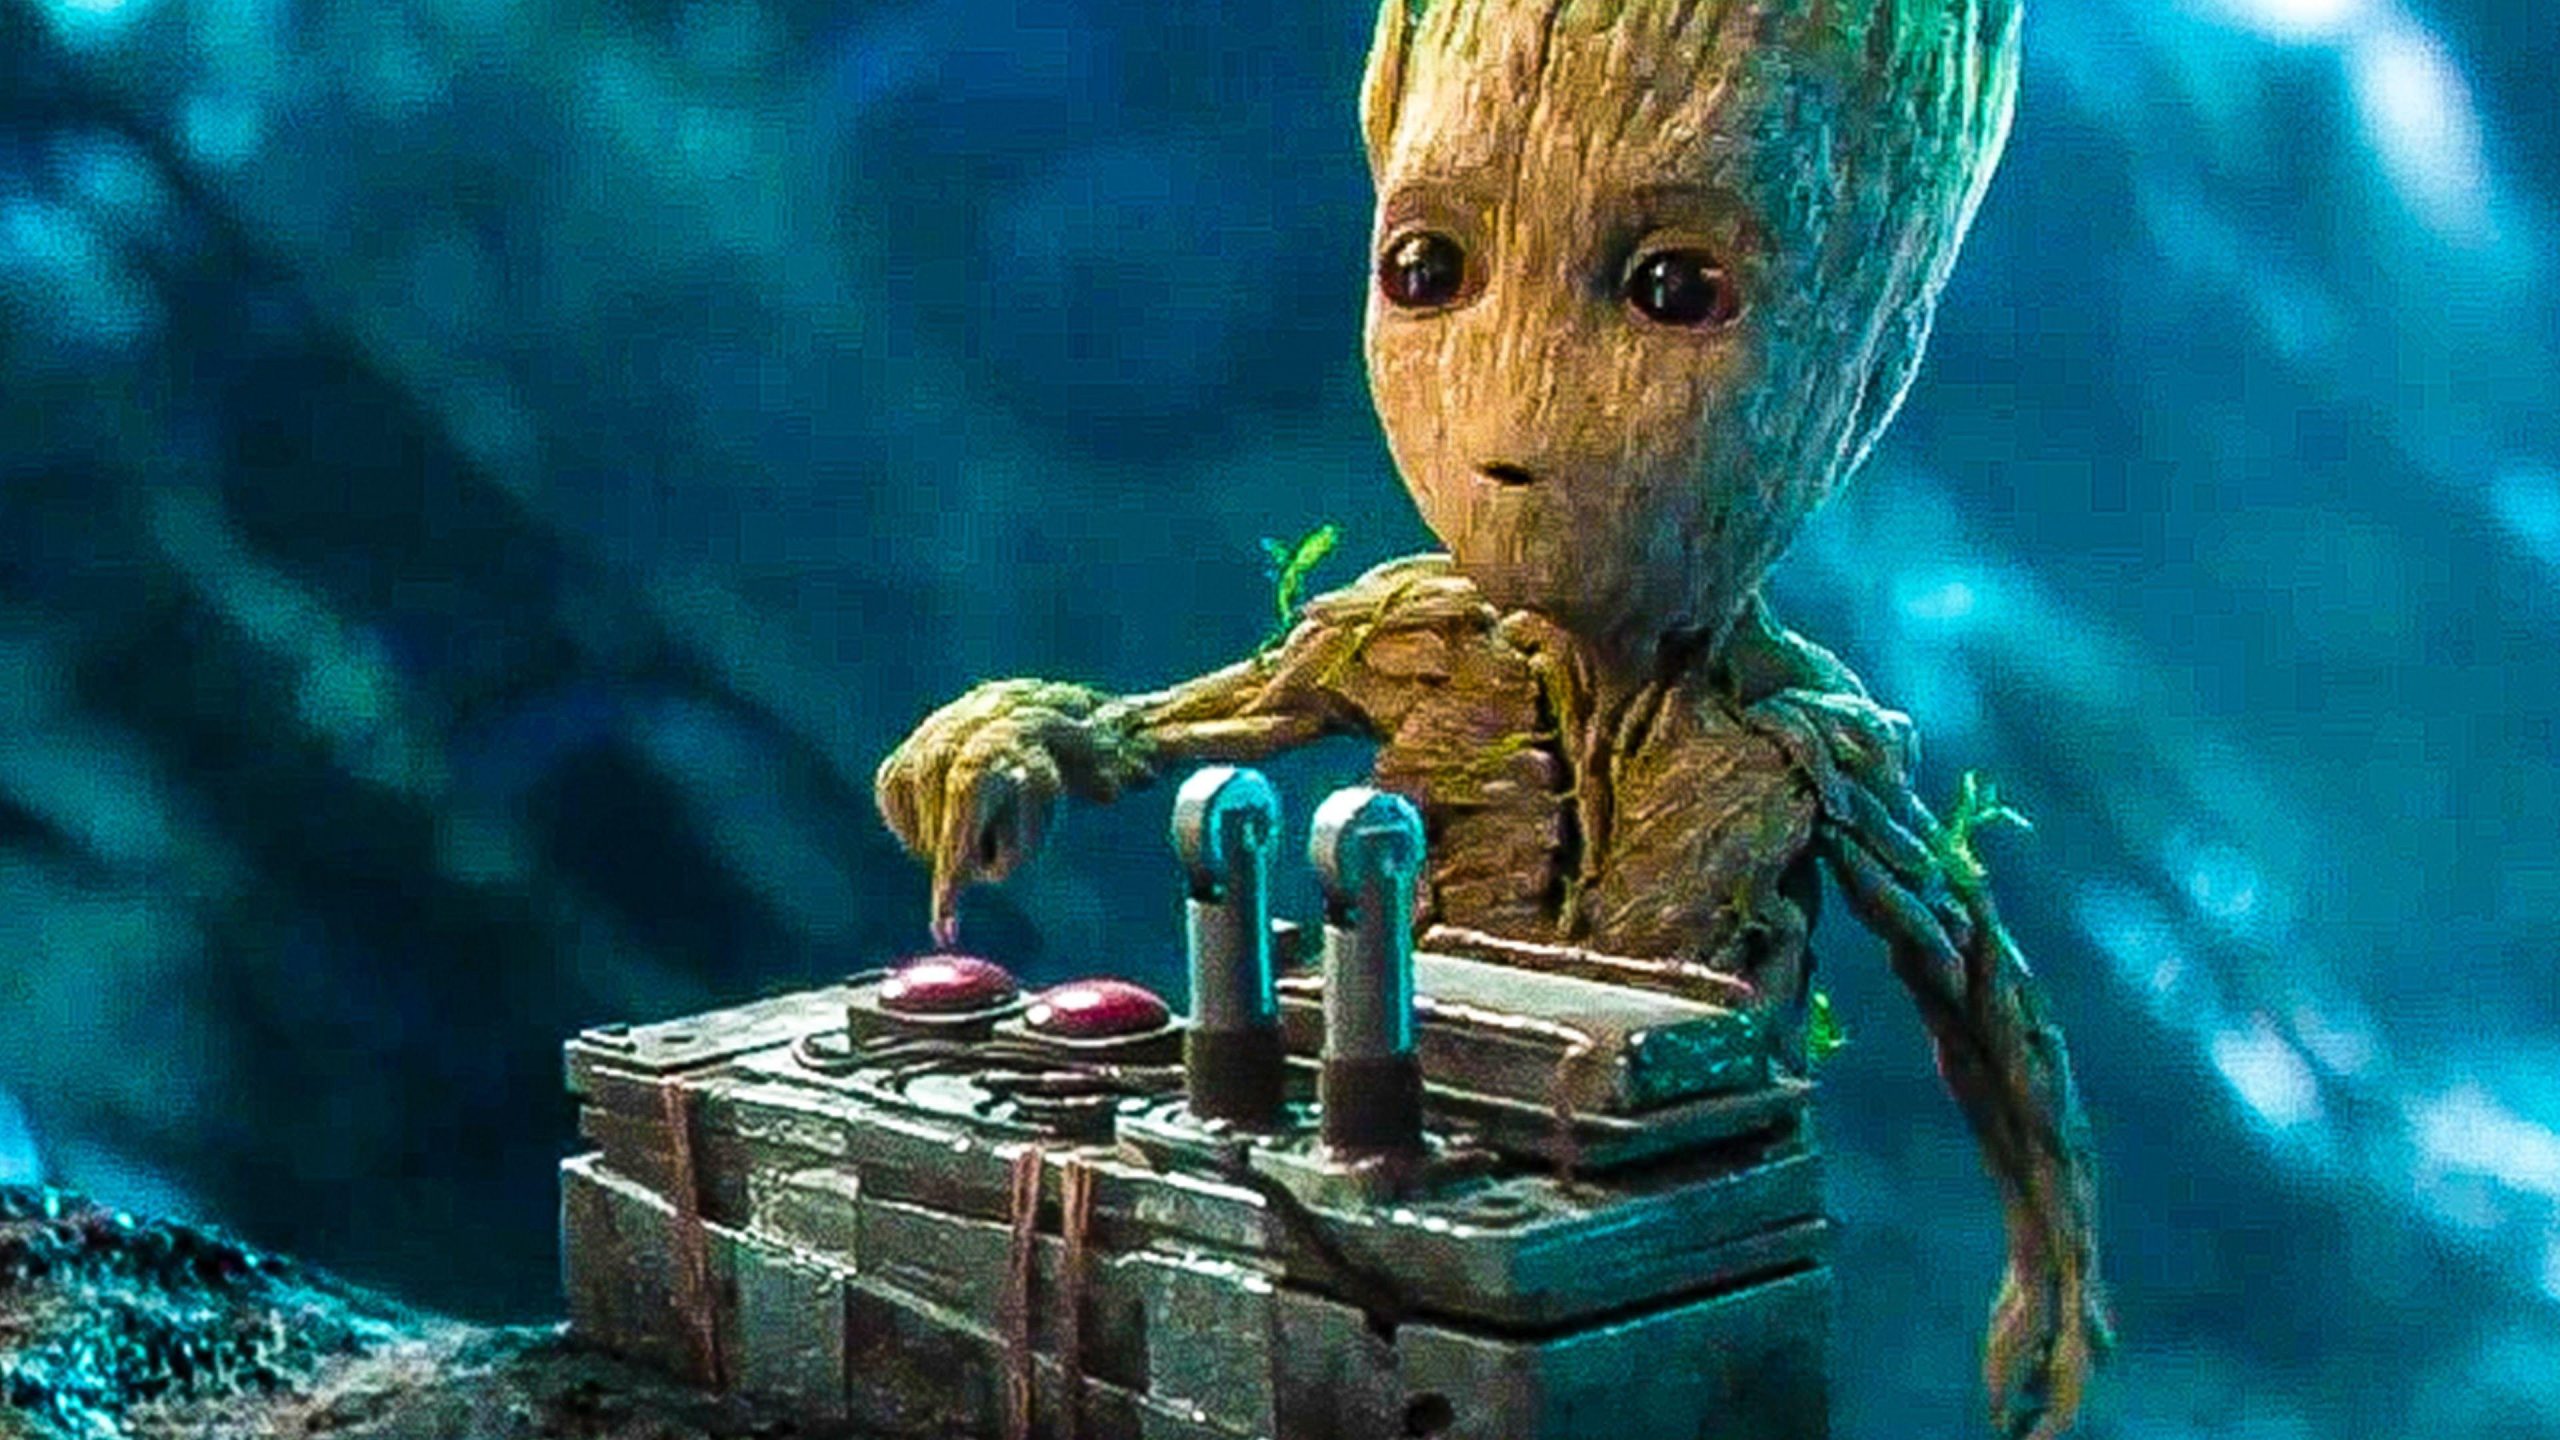 Cute Baby Groot Guardians Of The Galaxy Wallpapers For Free, Cute Baby Groot Guardians Of The Galaxy, Movies